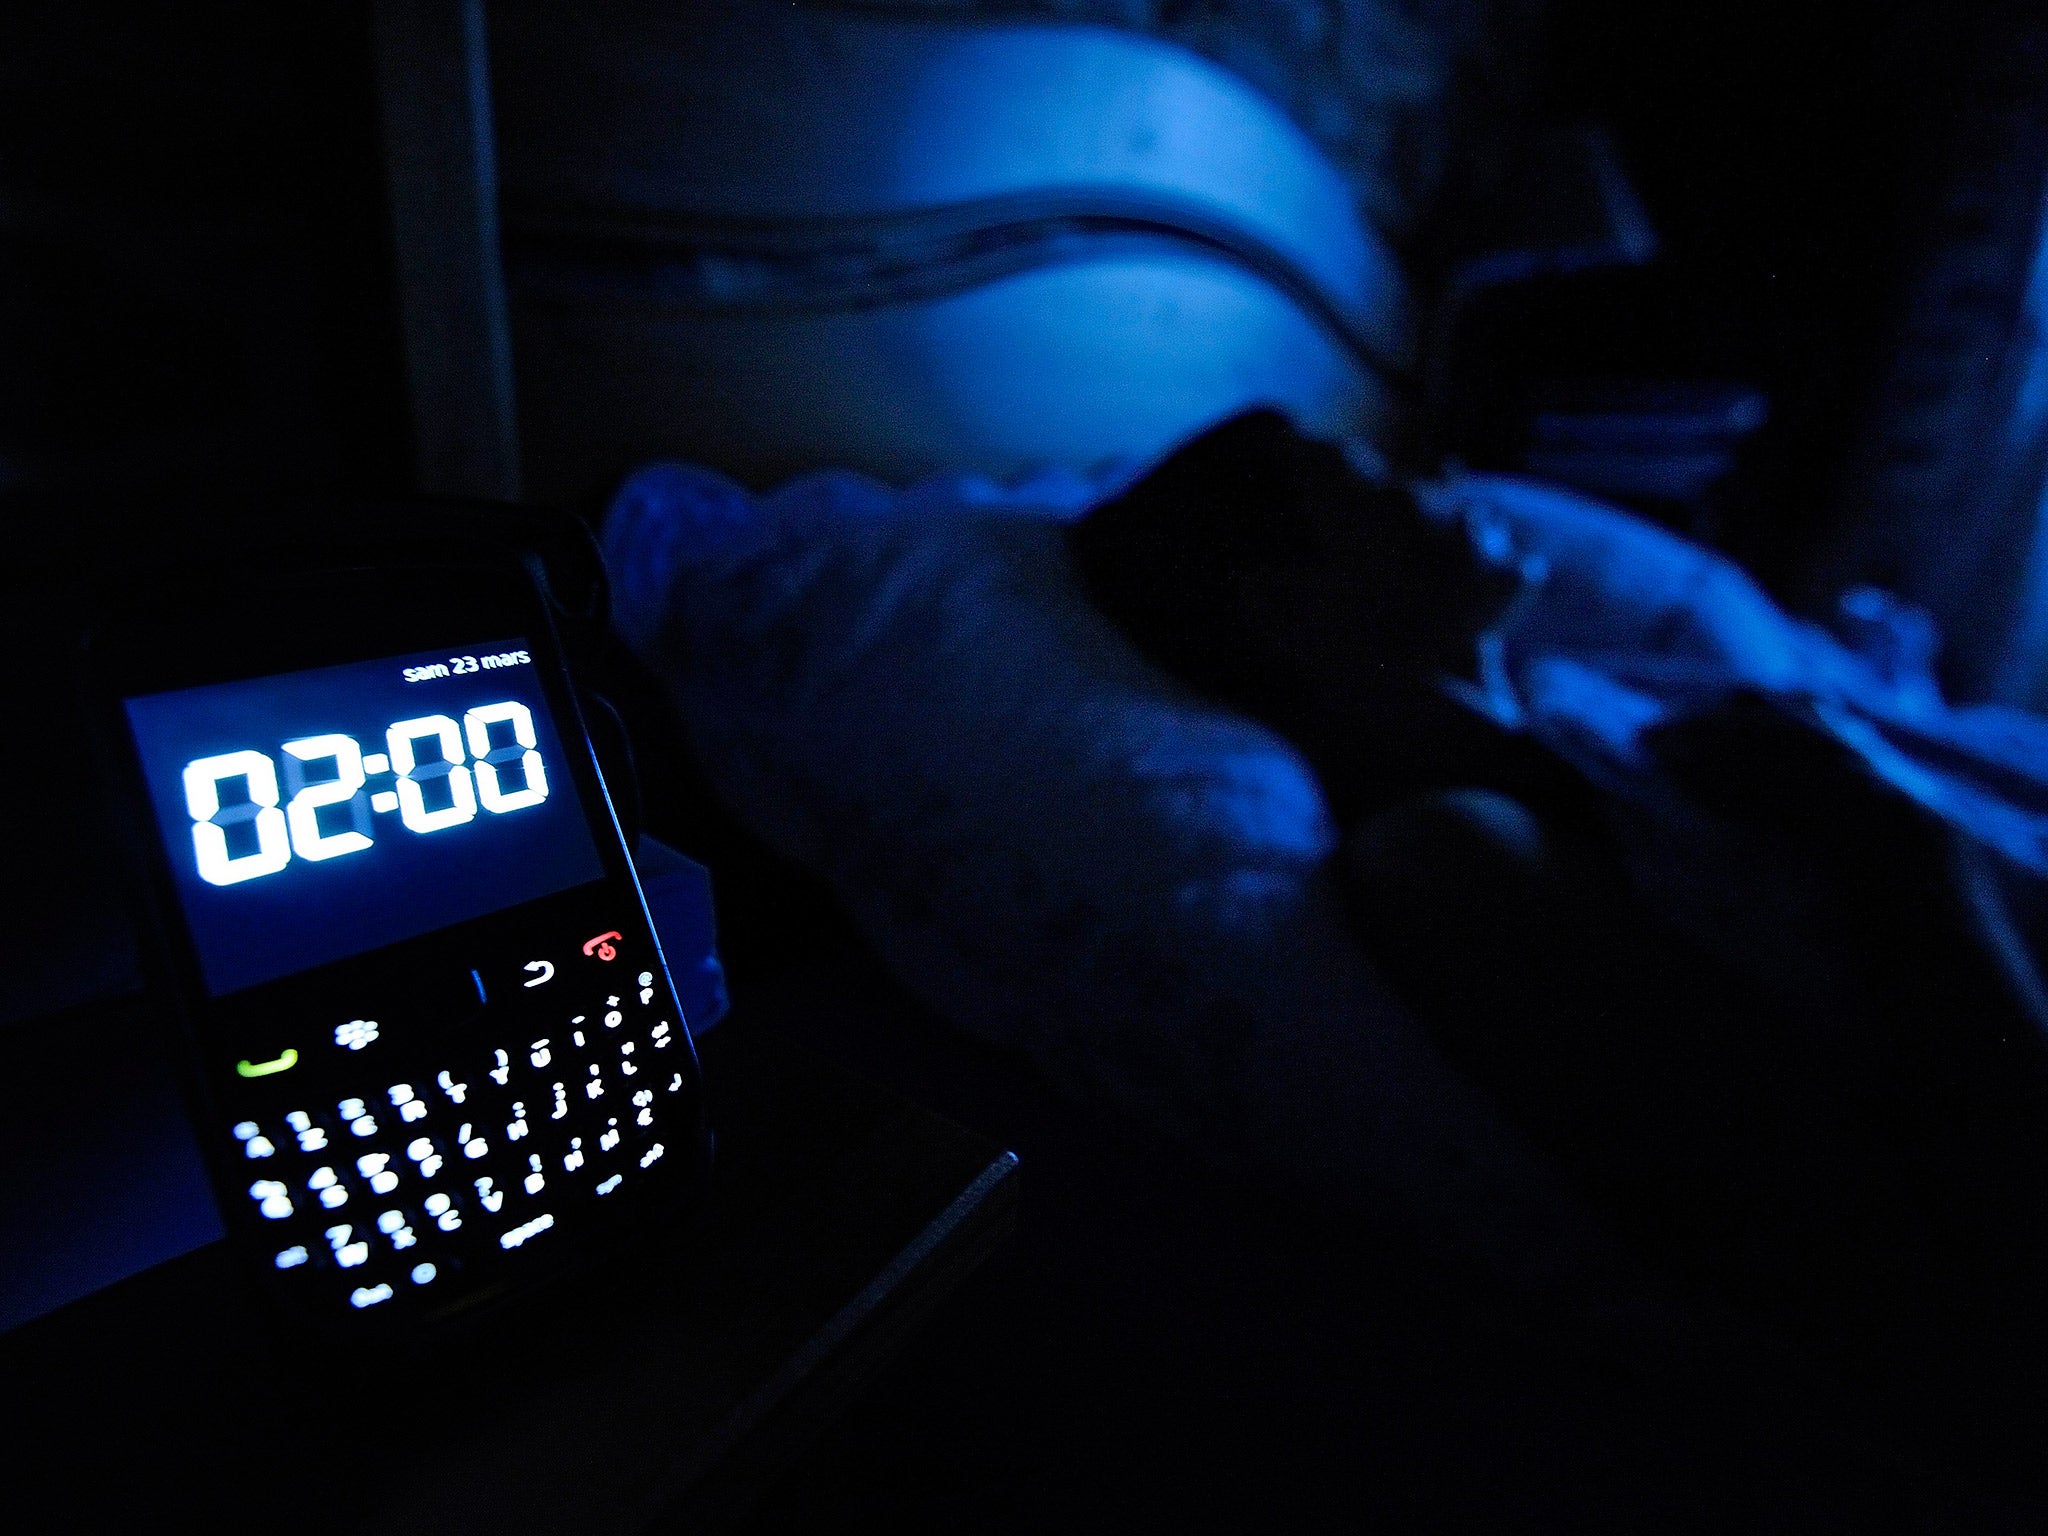 80 per cent of us keep our phones on overnight, with 50 per cent using them as an alarm clock